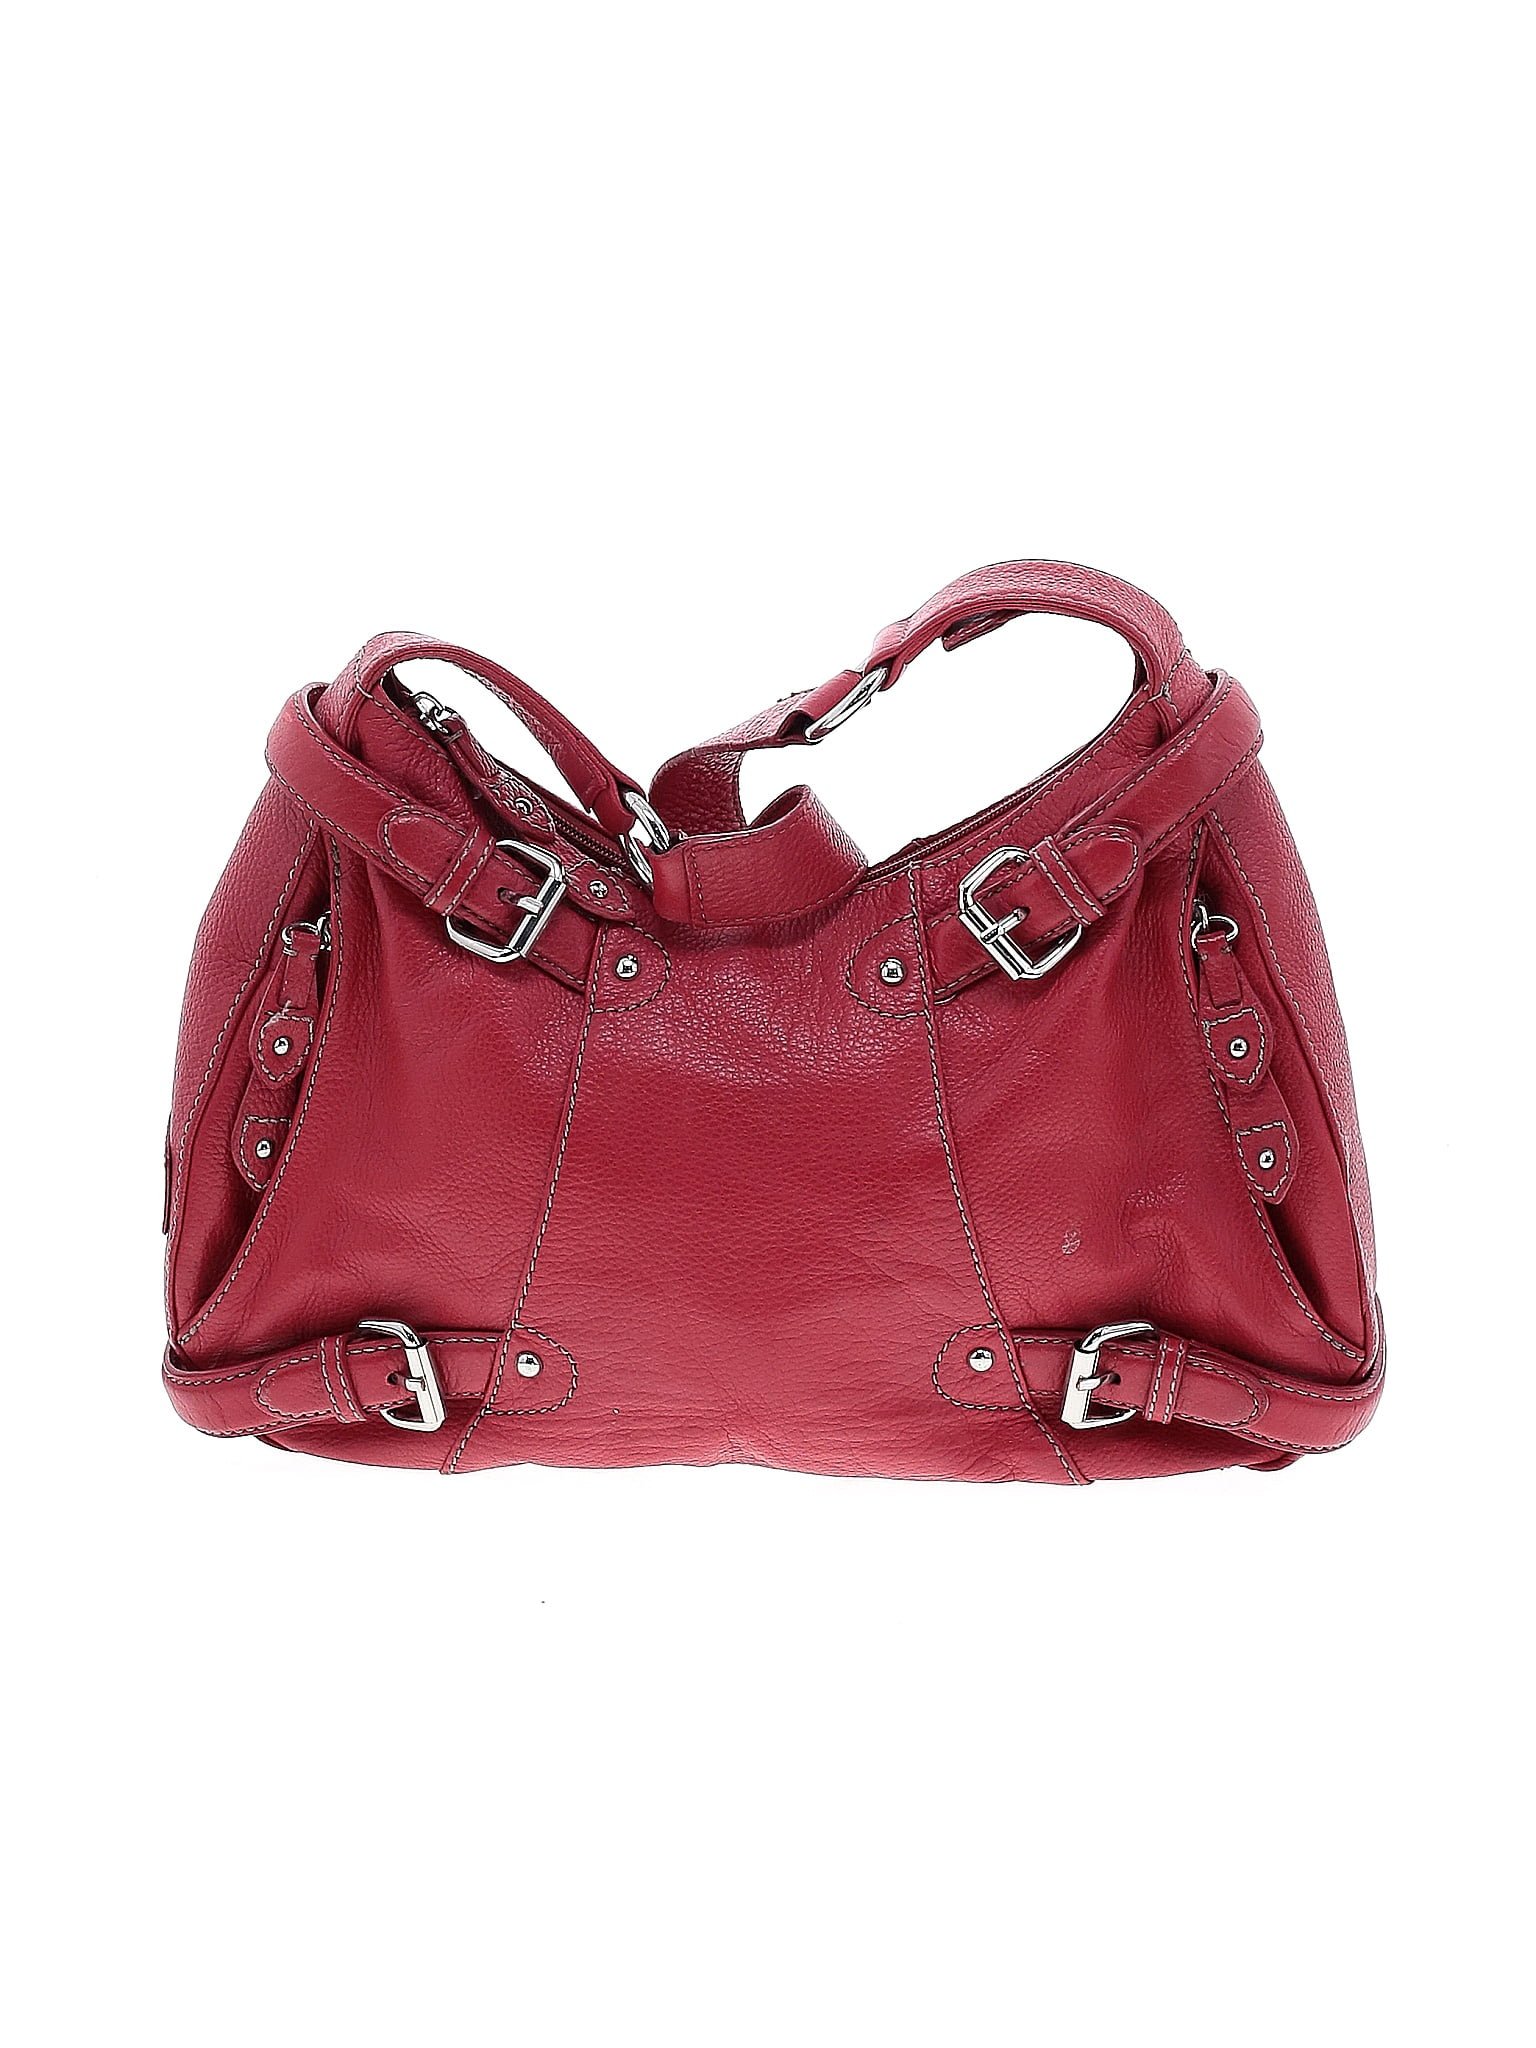 MAXX New York 100% Leather Solid Red Leather Shoulder Bag One Size - 69 ...